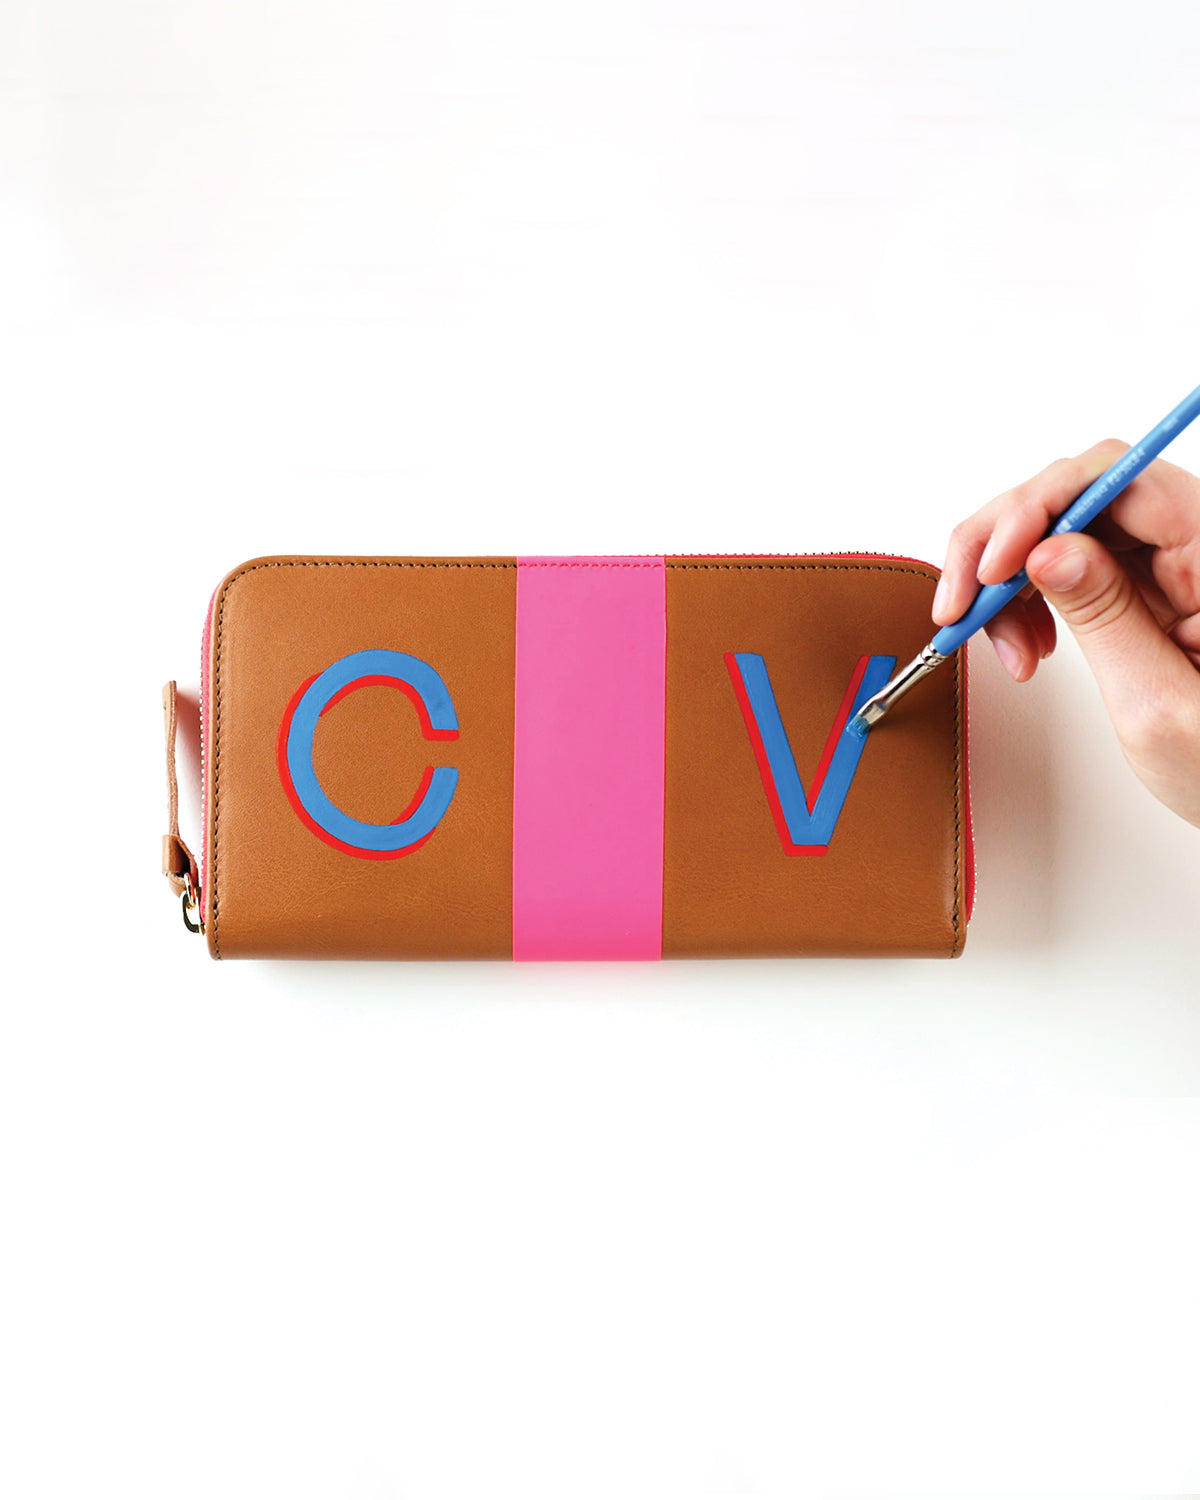 Zip Wallet with Neon PInk being handpainted with the letters C and V. 